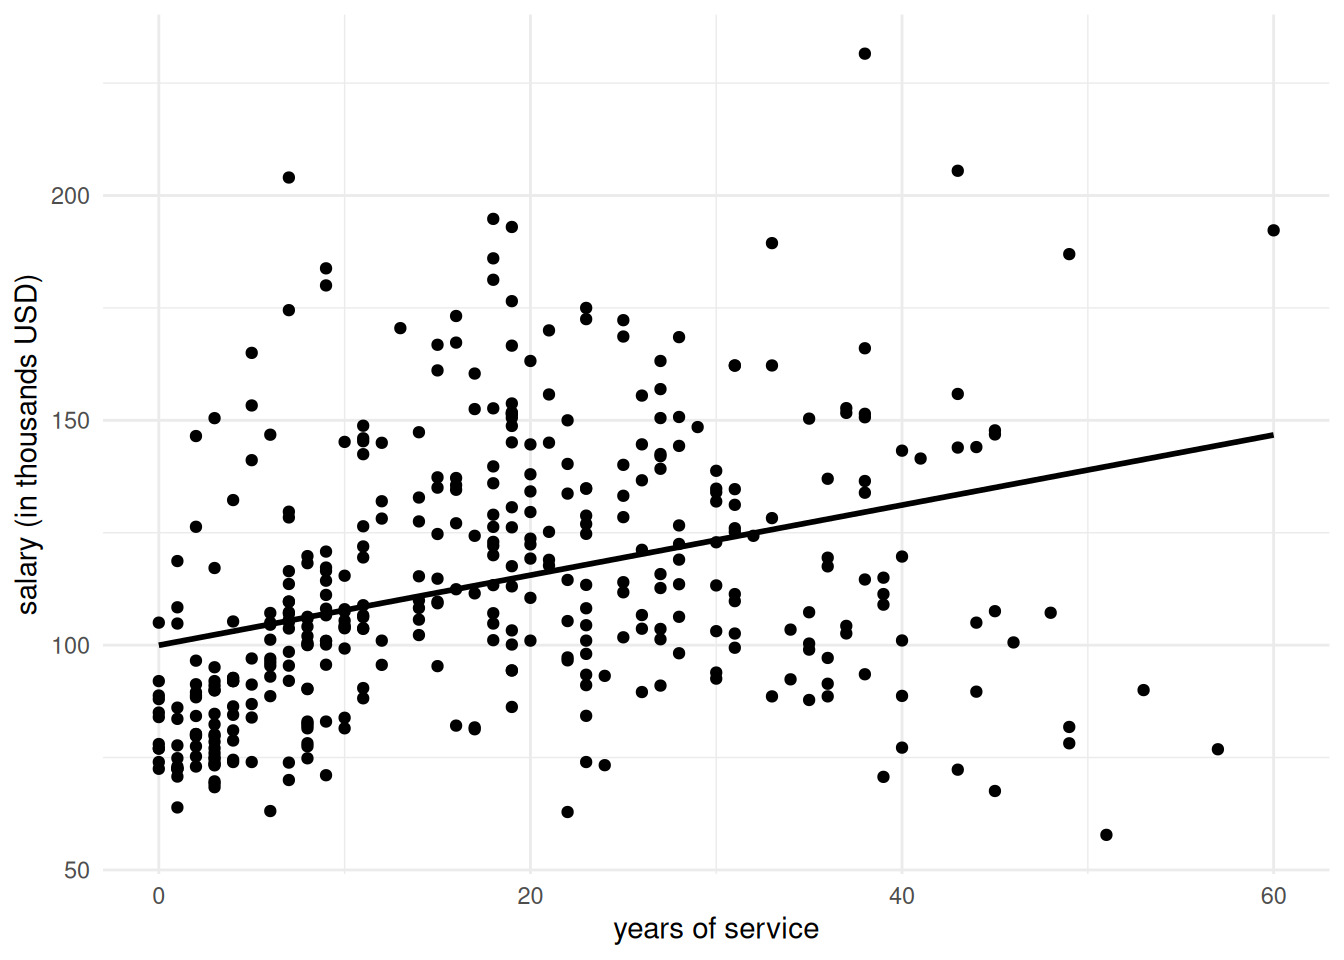 Simple linear regression model for the salary of professors as a function of the number of years of service; the line is the solution of the least squares problem.